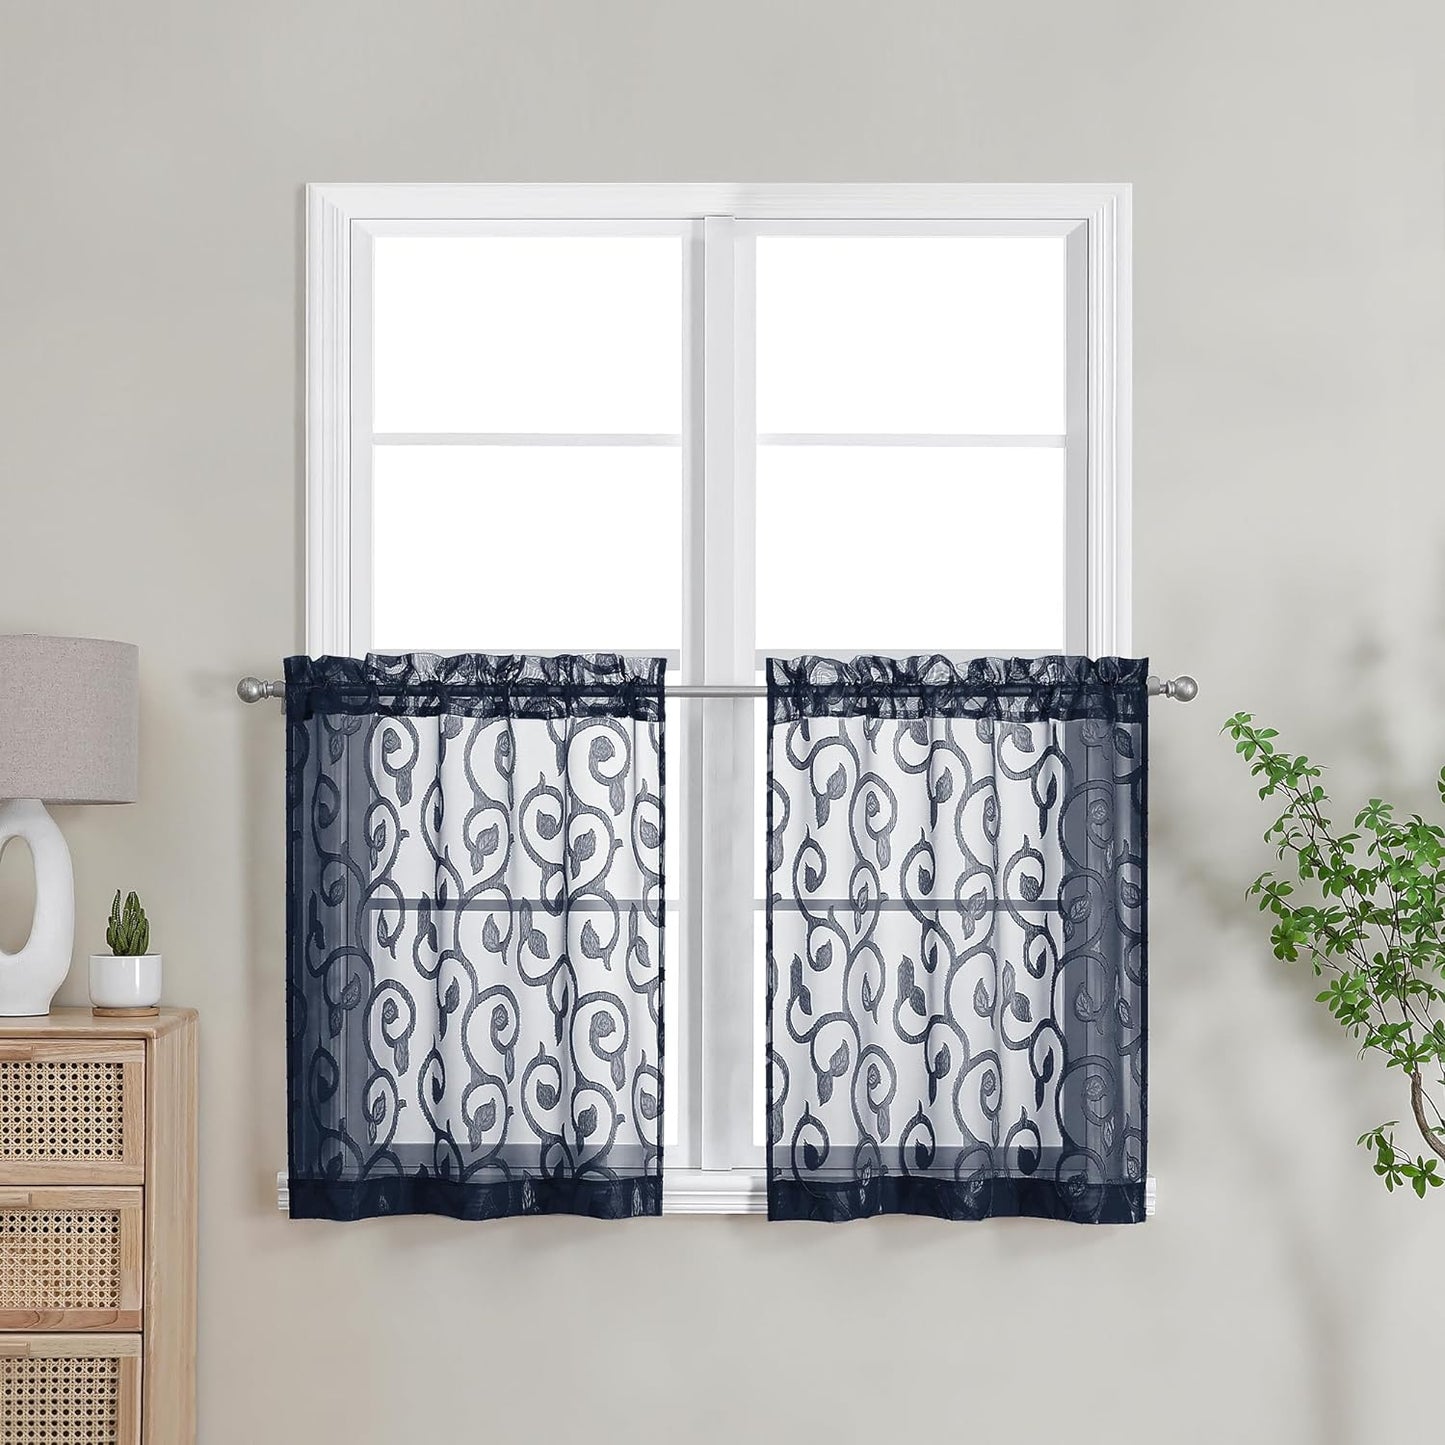 OWENIE Furman Sheer White Curtains 84 Inches Long for Bedroom Living Room 2 Panels Set, White Curtains Jacquard Clip Light Filtering Semi Sheer Curtain Transparent Rod Pocket Window Drapes, 2 Pcs  OWENIE Navy Blue 26W X 24L 